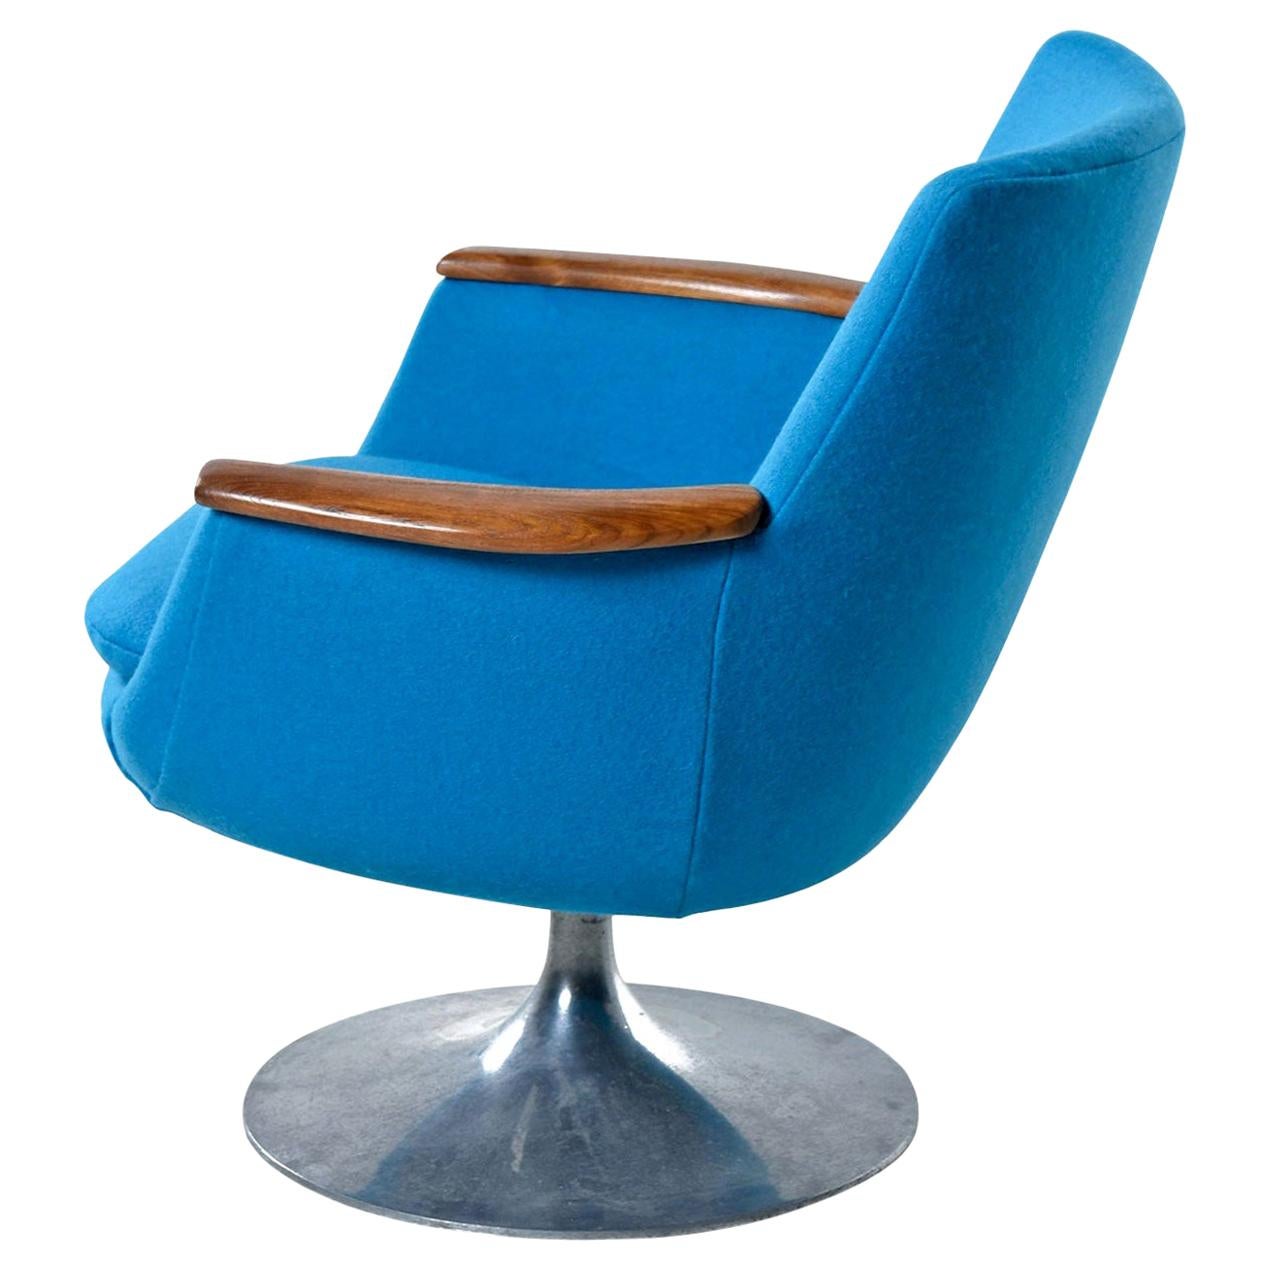 It's difficult to walk past this chair and not smile. At a glance, the look might seem familiar, but we assure you, there is nothing common about this enigmatic pod chair. The tulip base is labeled Hong stole, but we've never seen any pod chairs by